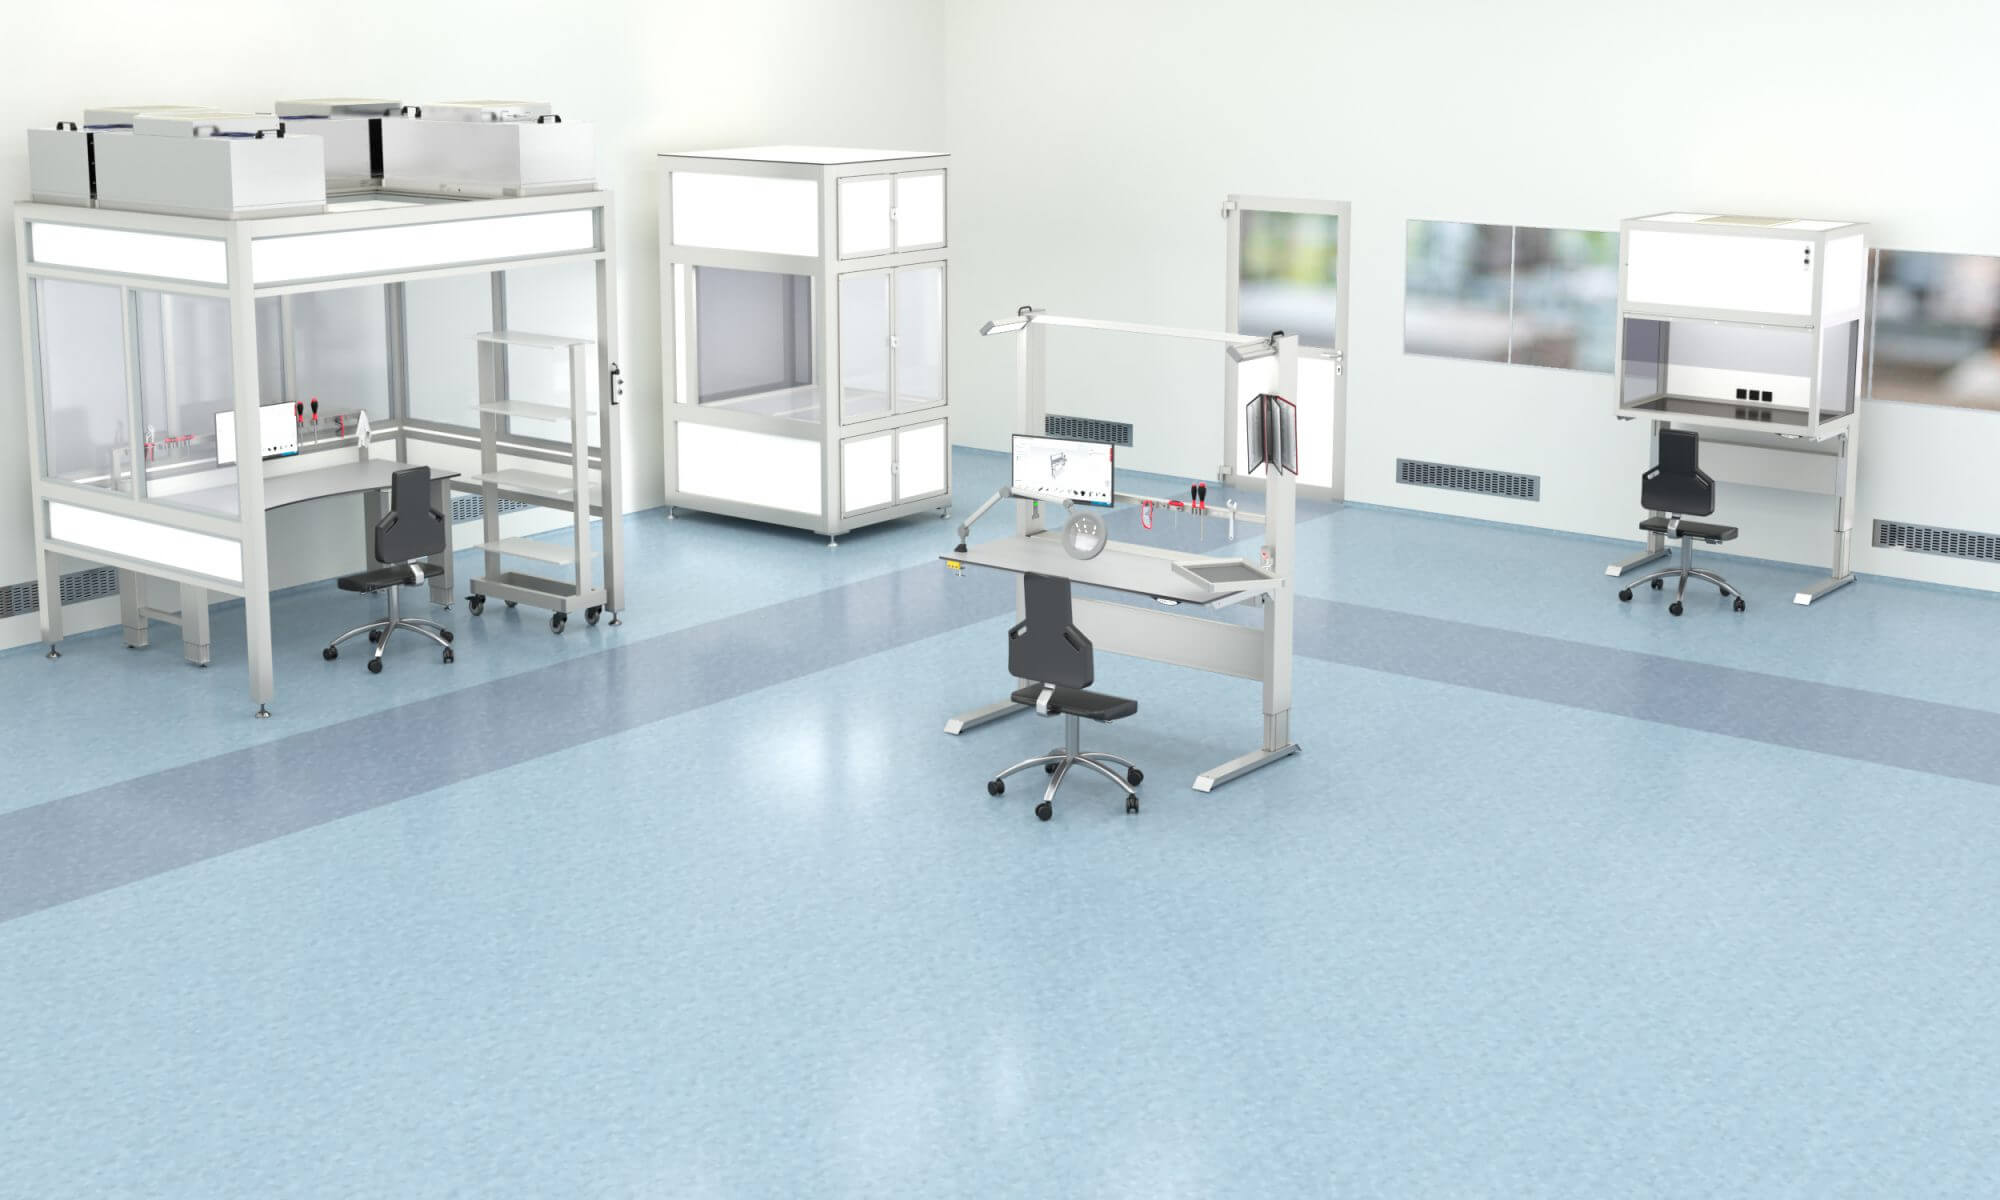 Cleanroom production – modular, flexible solutions